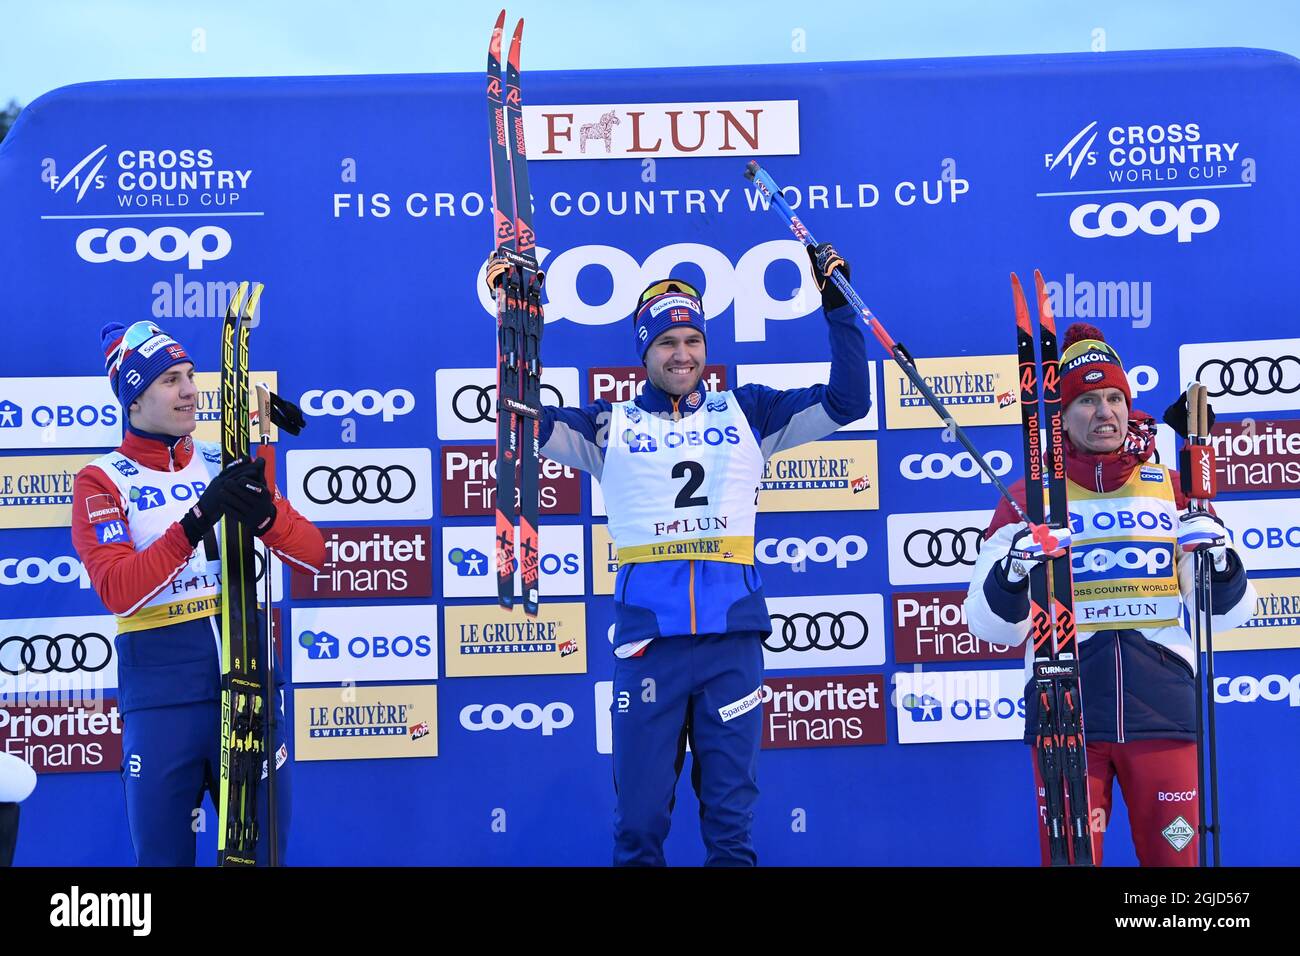 Norway's Paal Golberg winner (C) and Norway's Erik Valness (L) second place and Russias Alexander Bolshunov (R) third place during men's sprint at the FIS Cross Country Skiing World Cup in Falun, Sweden, Feb. 08, 2020. Photo: Henrik Montgomery / TT Stock Photo